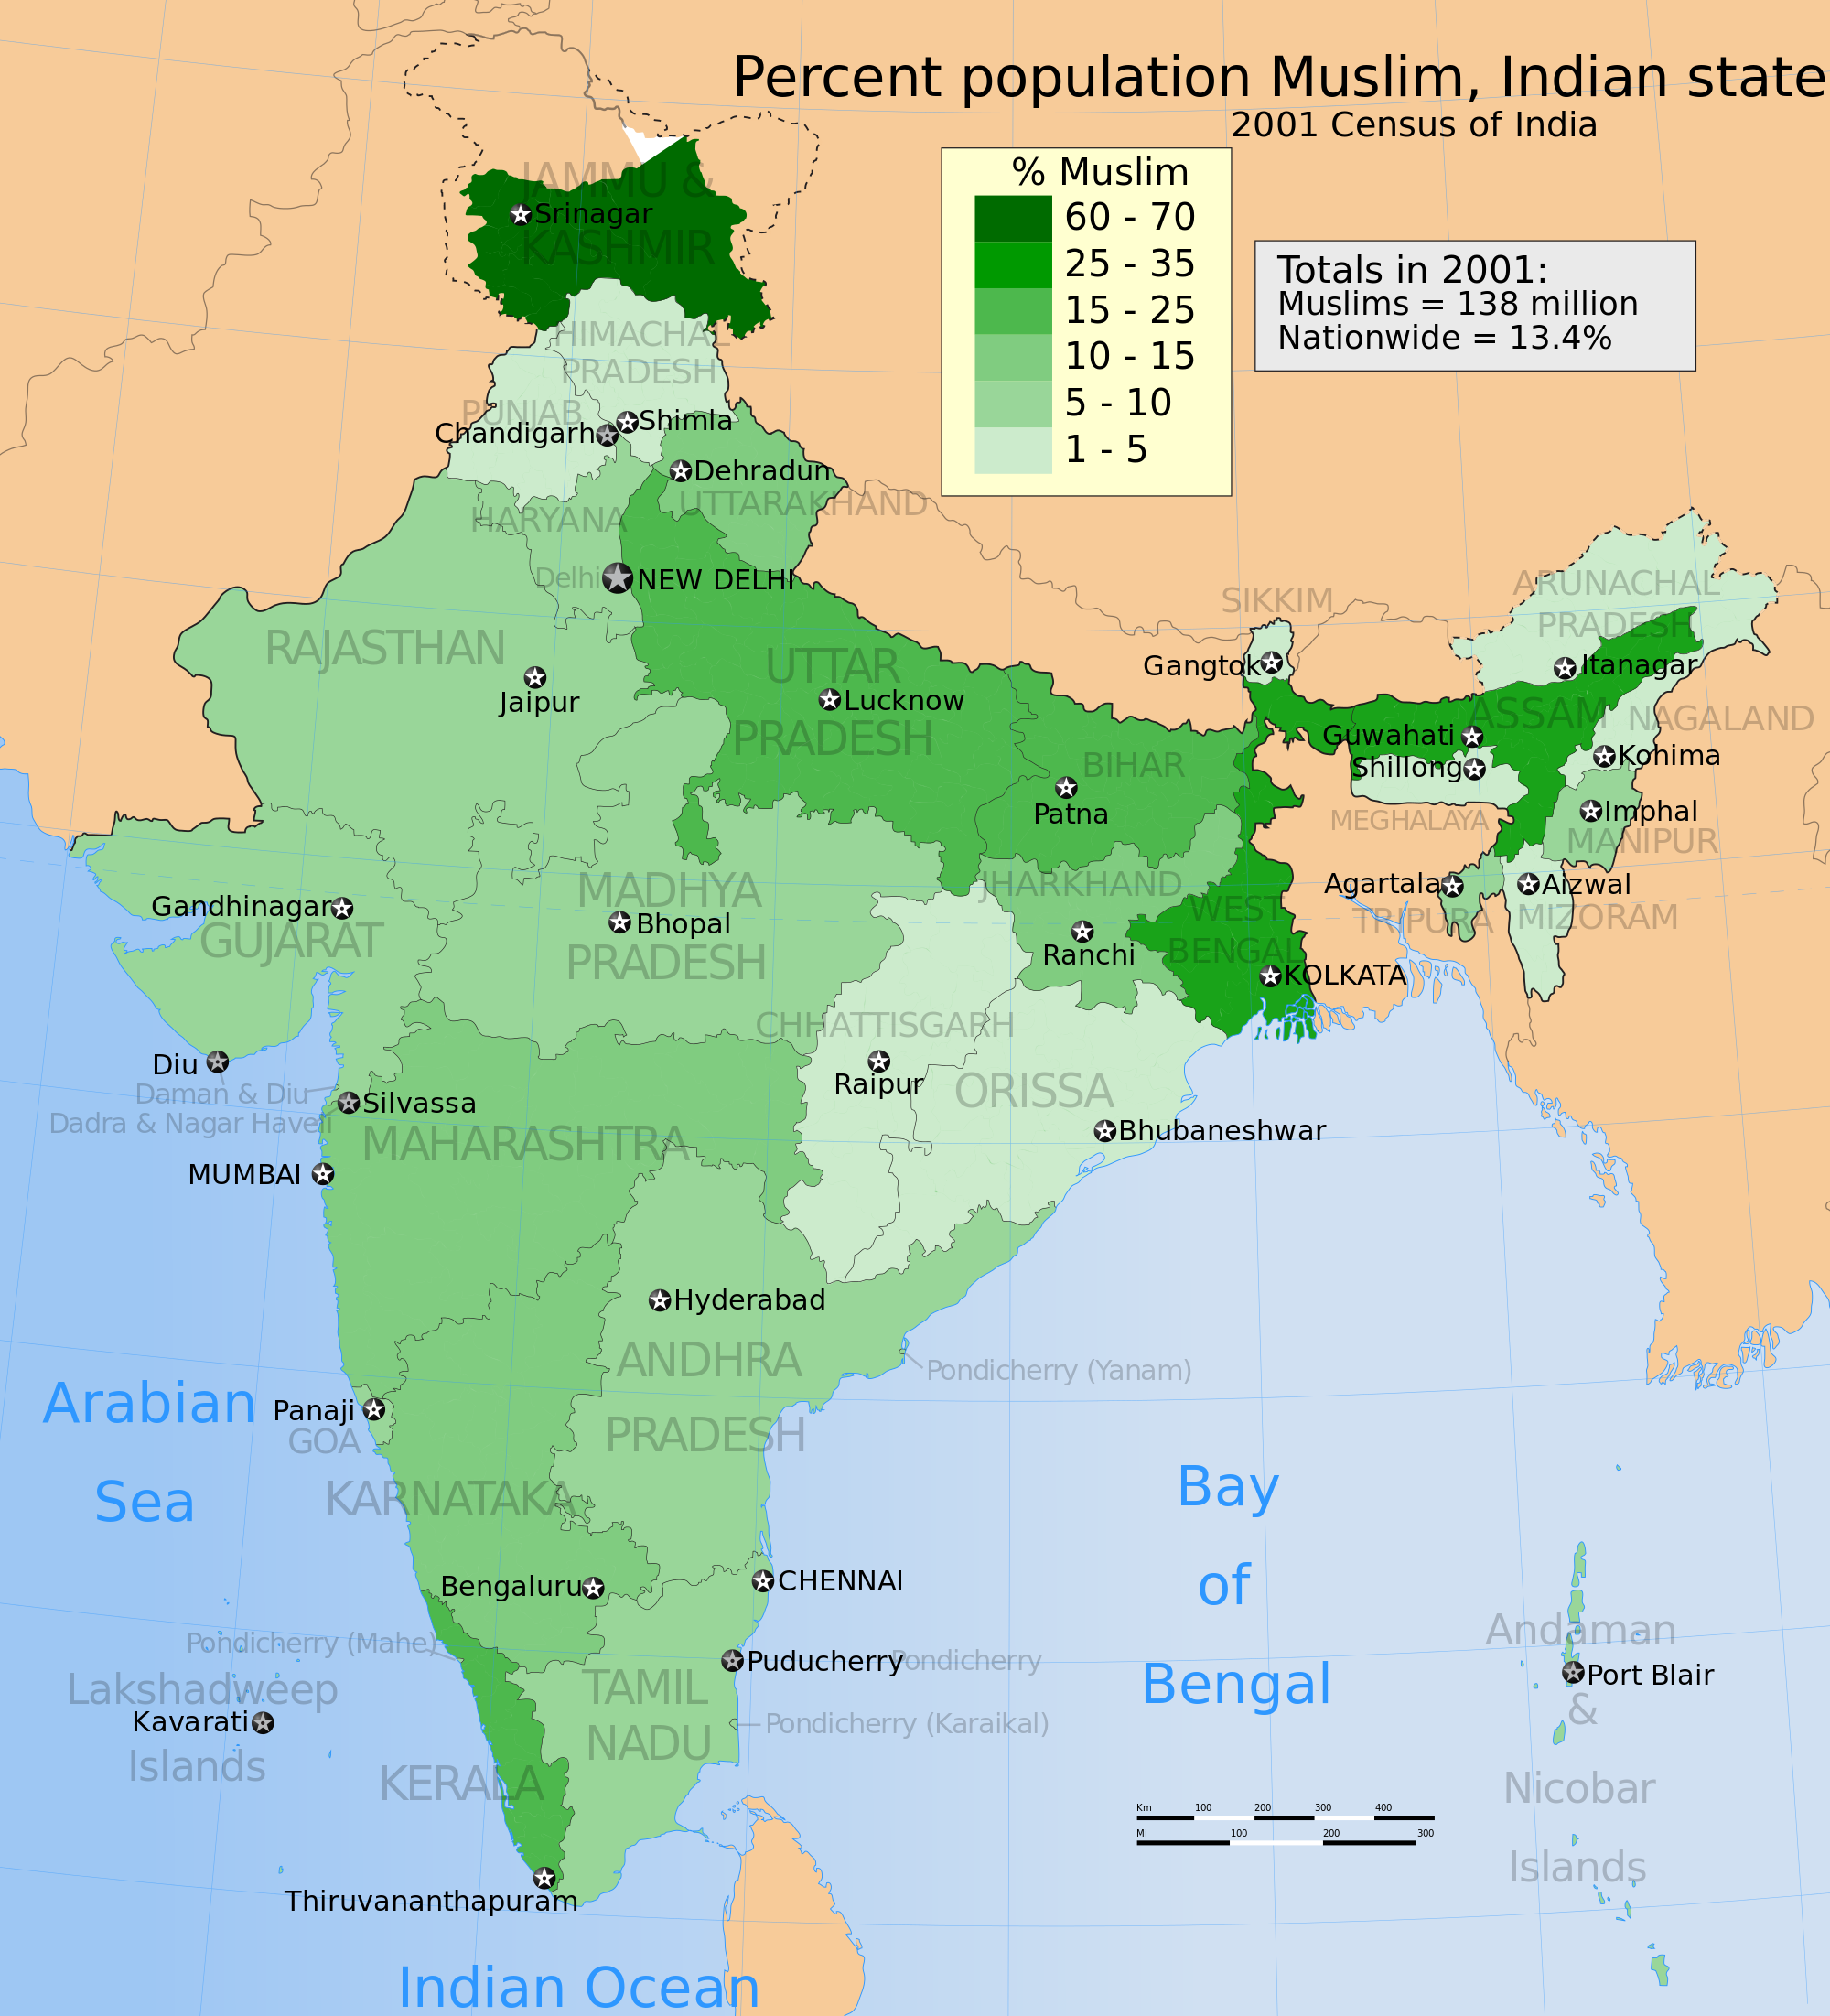 2001 Census of India showing distribution of religious minorities (graphic: Ministry of Home Affairs, Government of India)